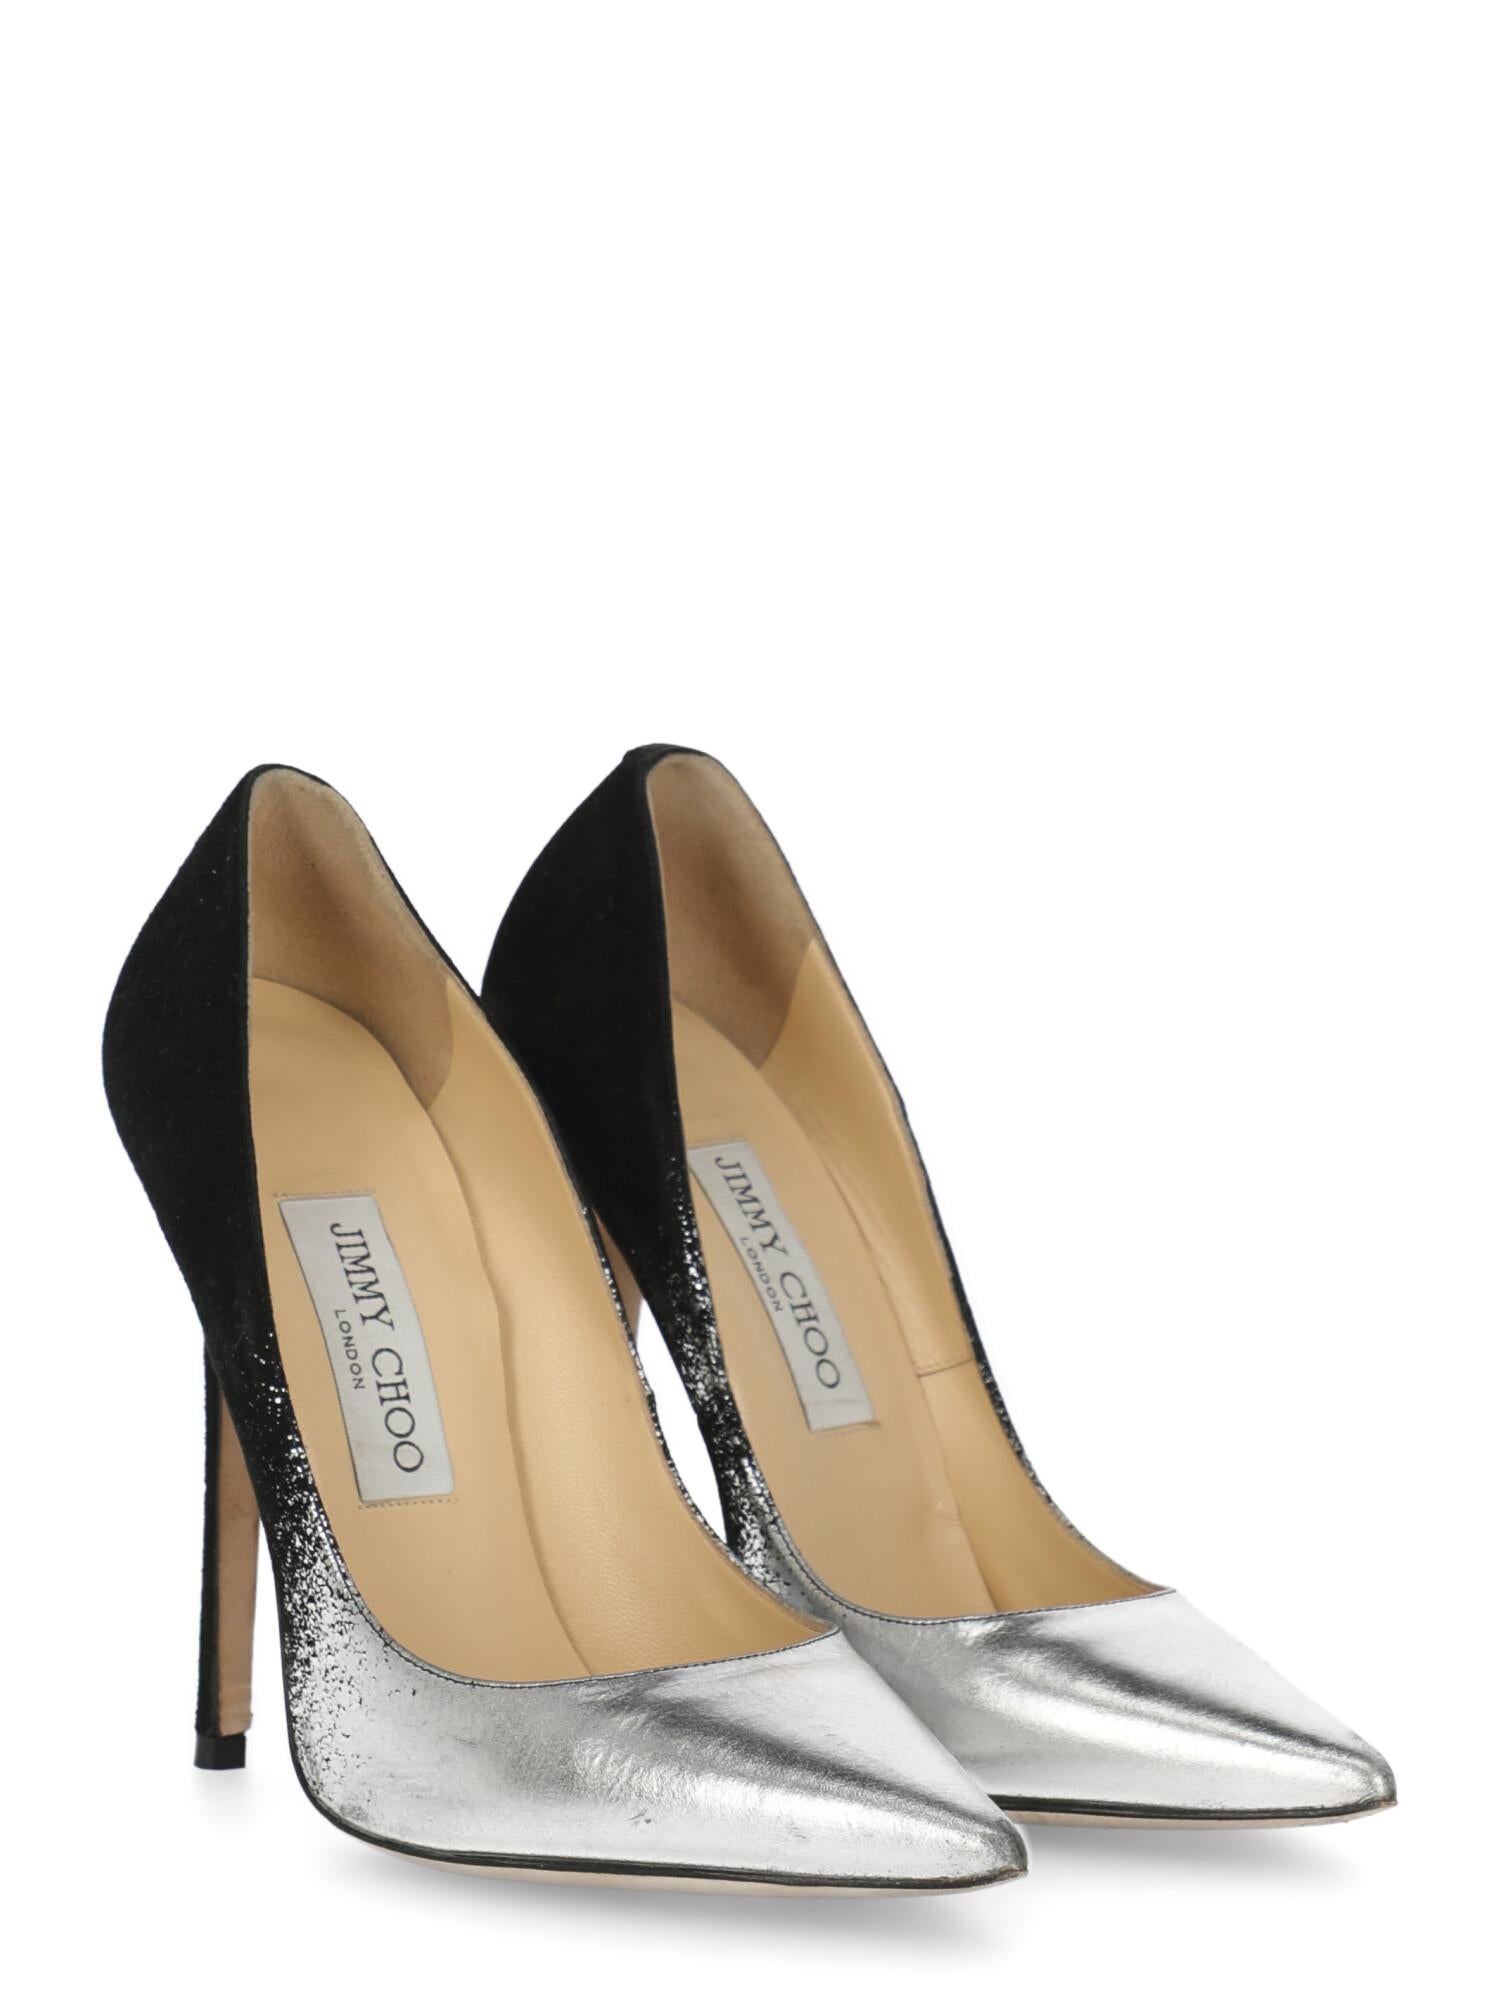 Product Description: Pumps, leather, other patterns, metallic effect, pointed toe, branded insole, stiletto heel, high heel

Includes:
- Dust bag

Product Condition: Very Good
Heel: slightly visible marks. Sole: visible signs of use. Upper: